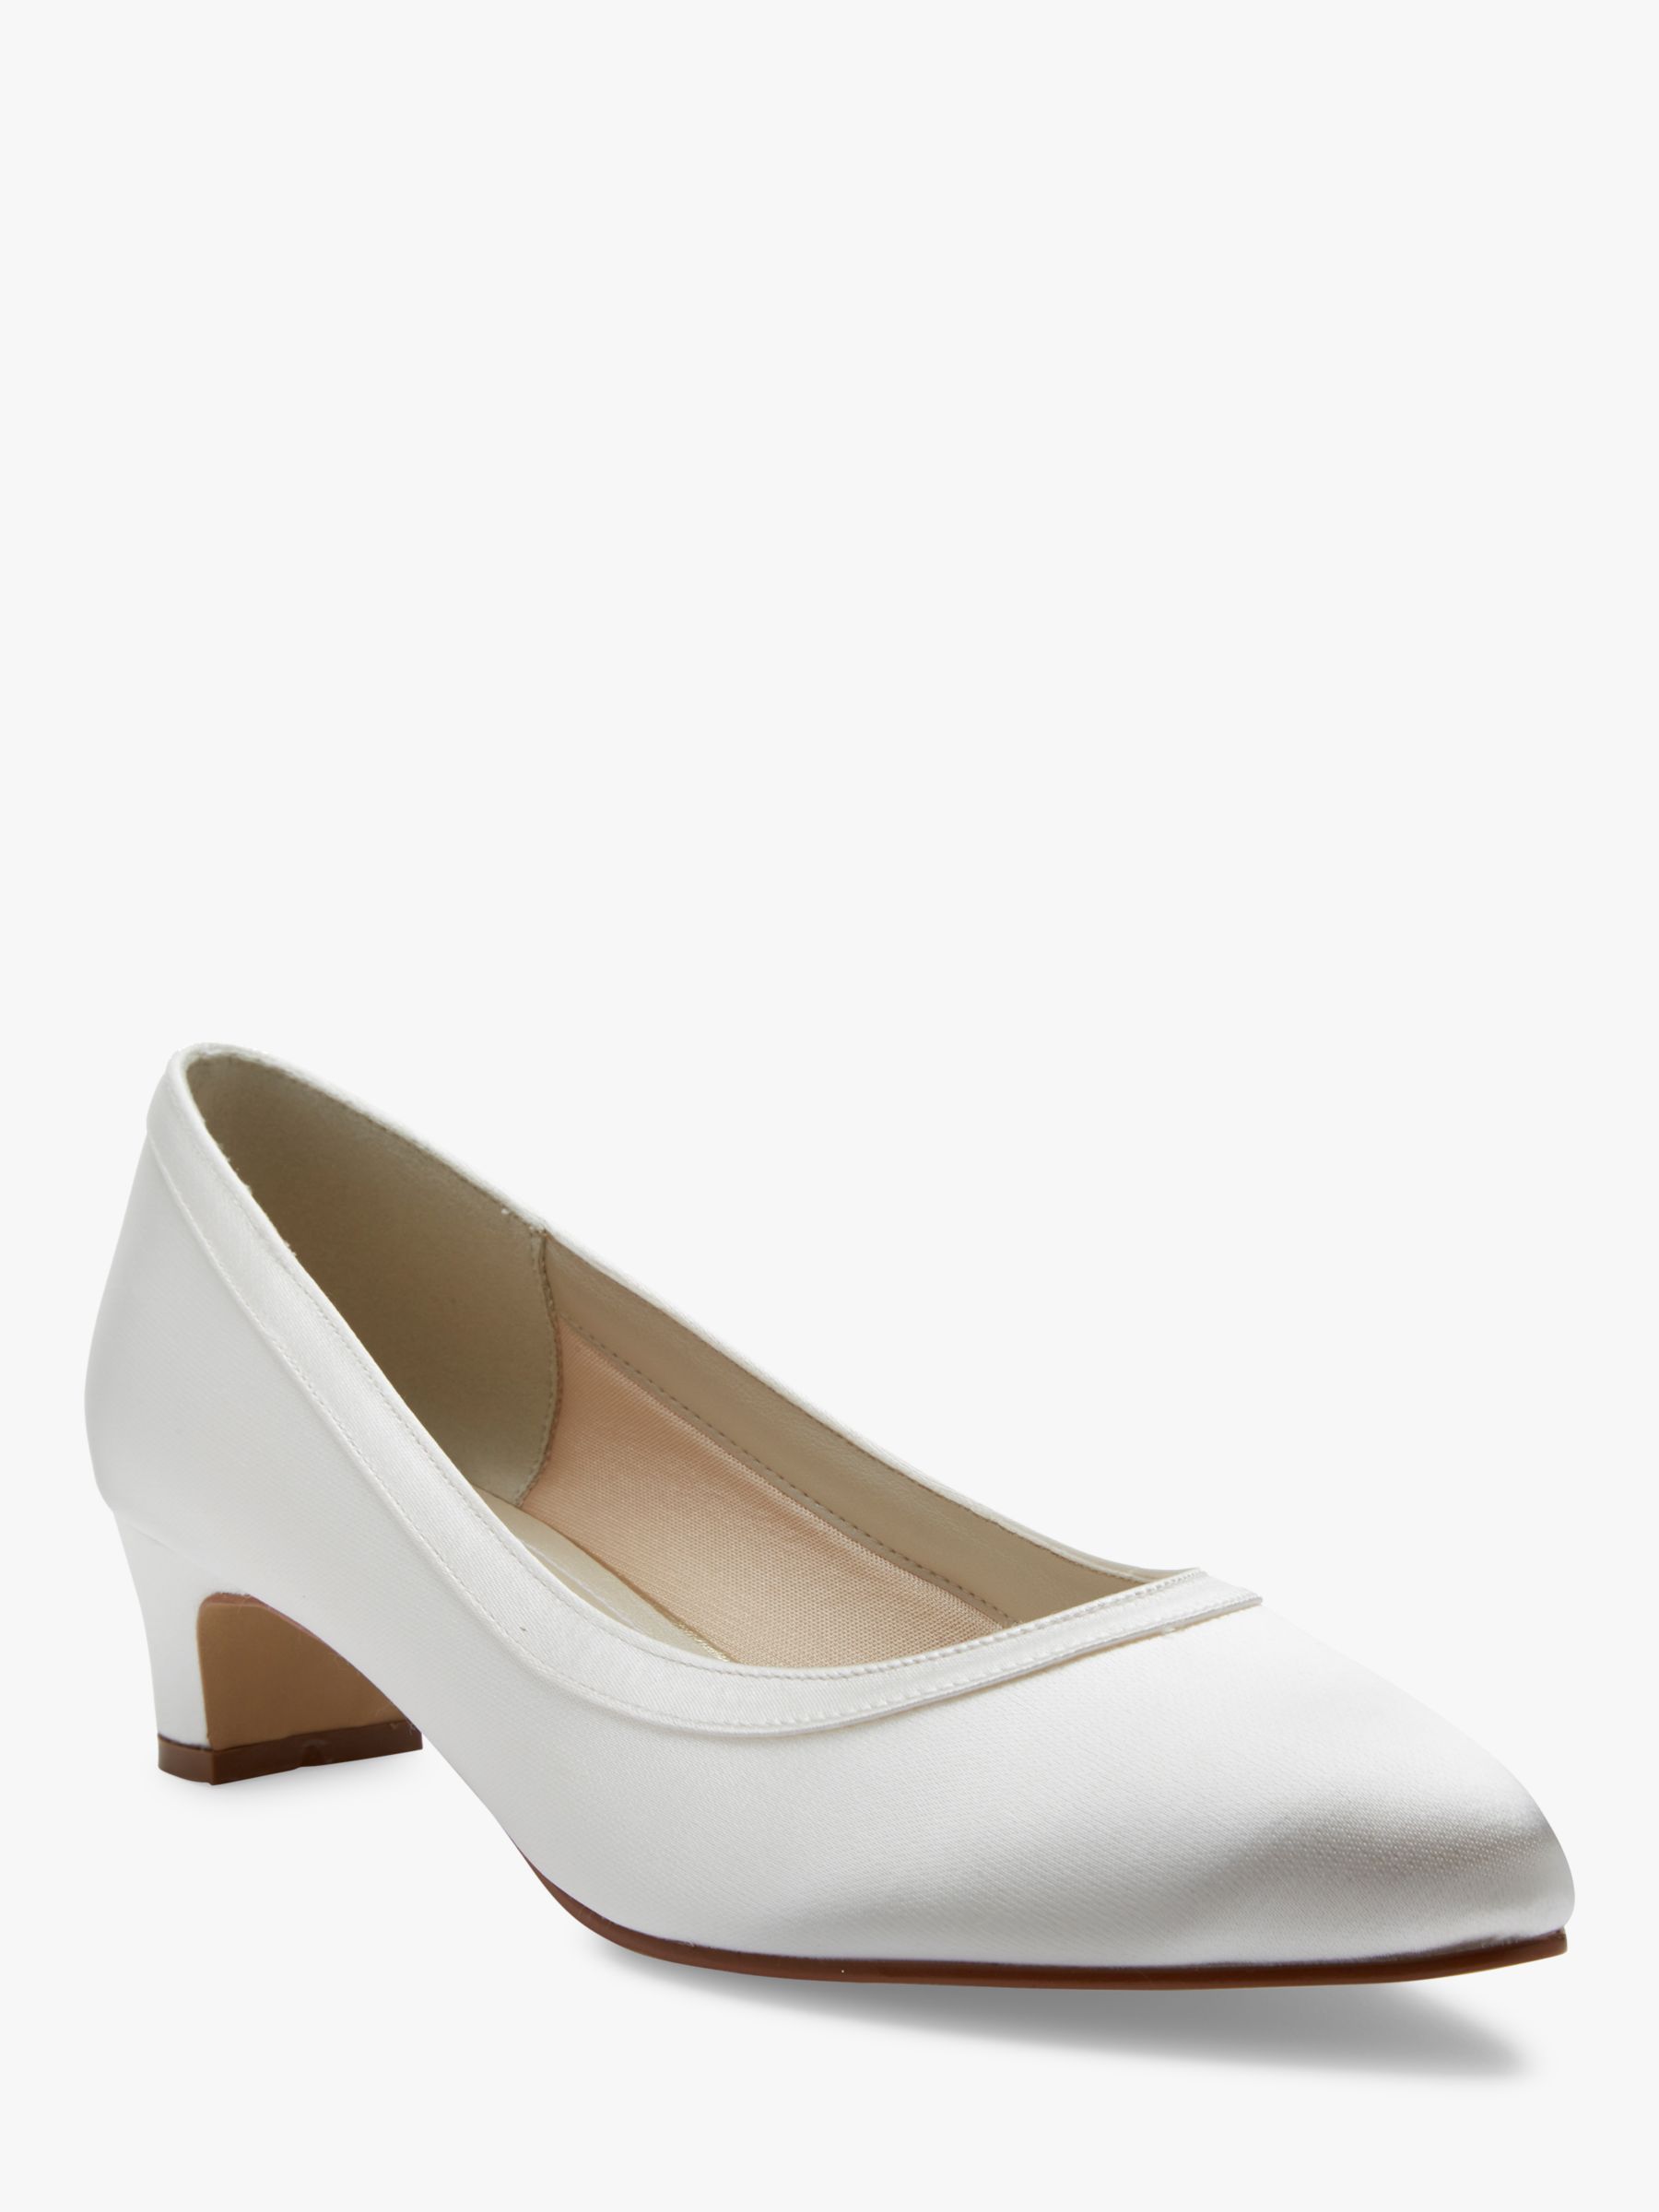 Rainbow Club Gisele Wide Fit Court Shoes, Ivory at John Lewis & Partners